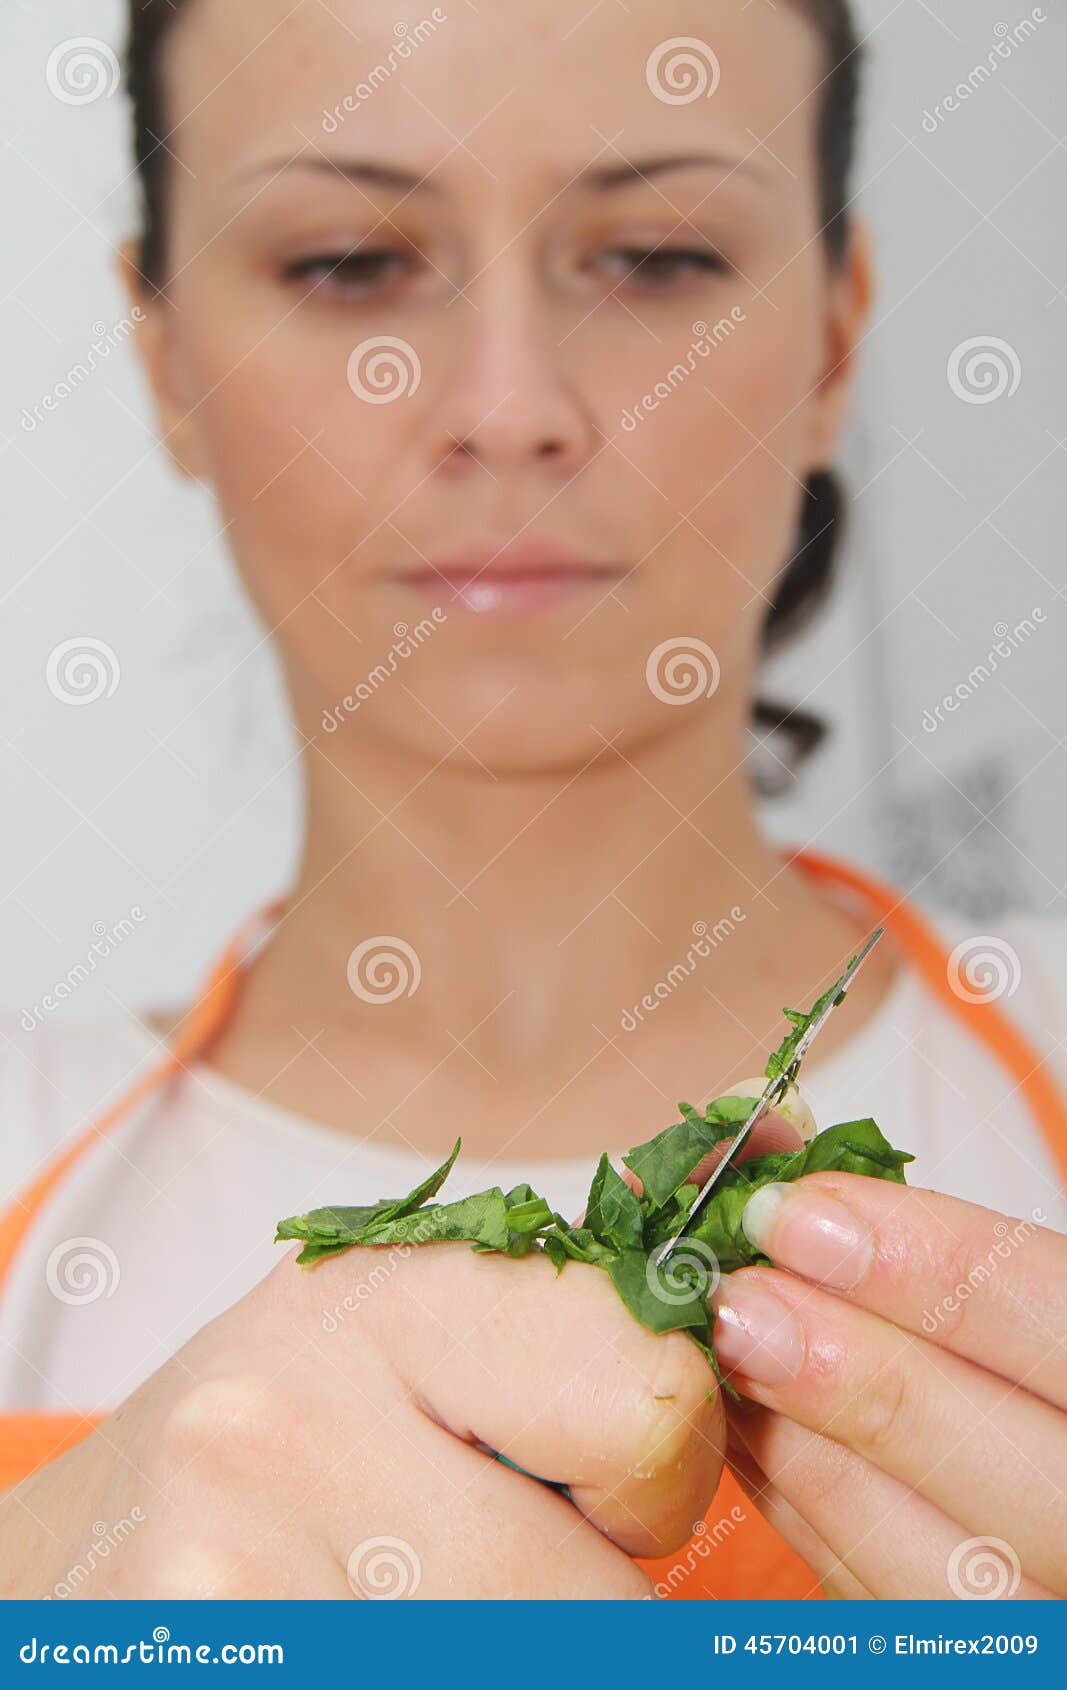 Woman with a spinach in a <b>modern kitchen</b> - woman-spinach-modern-kitchen-photo-45704001